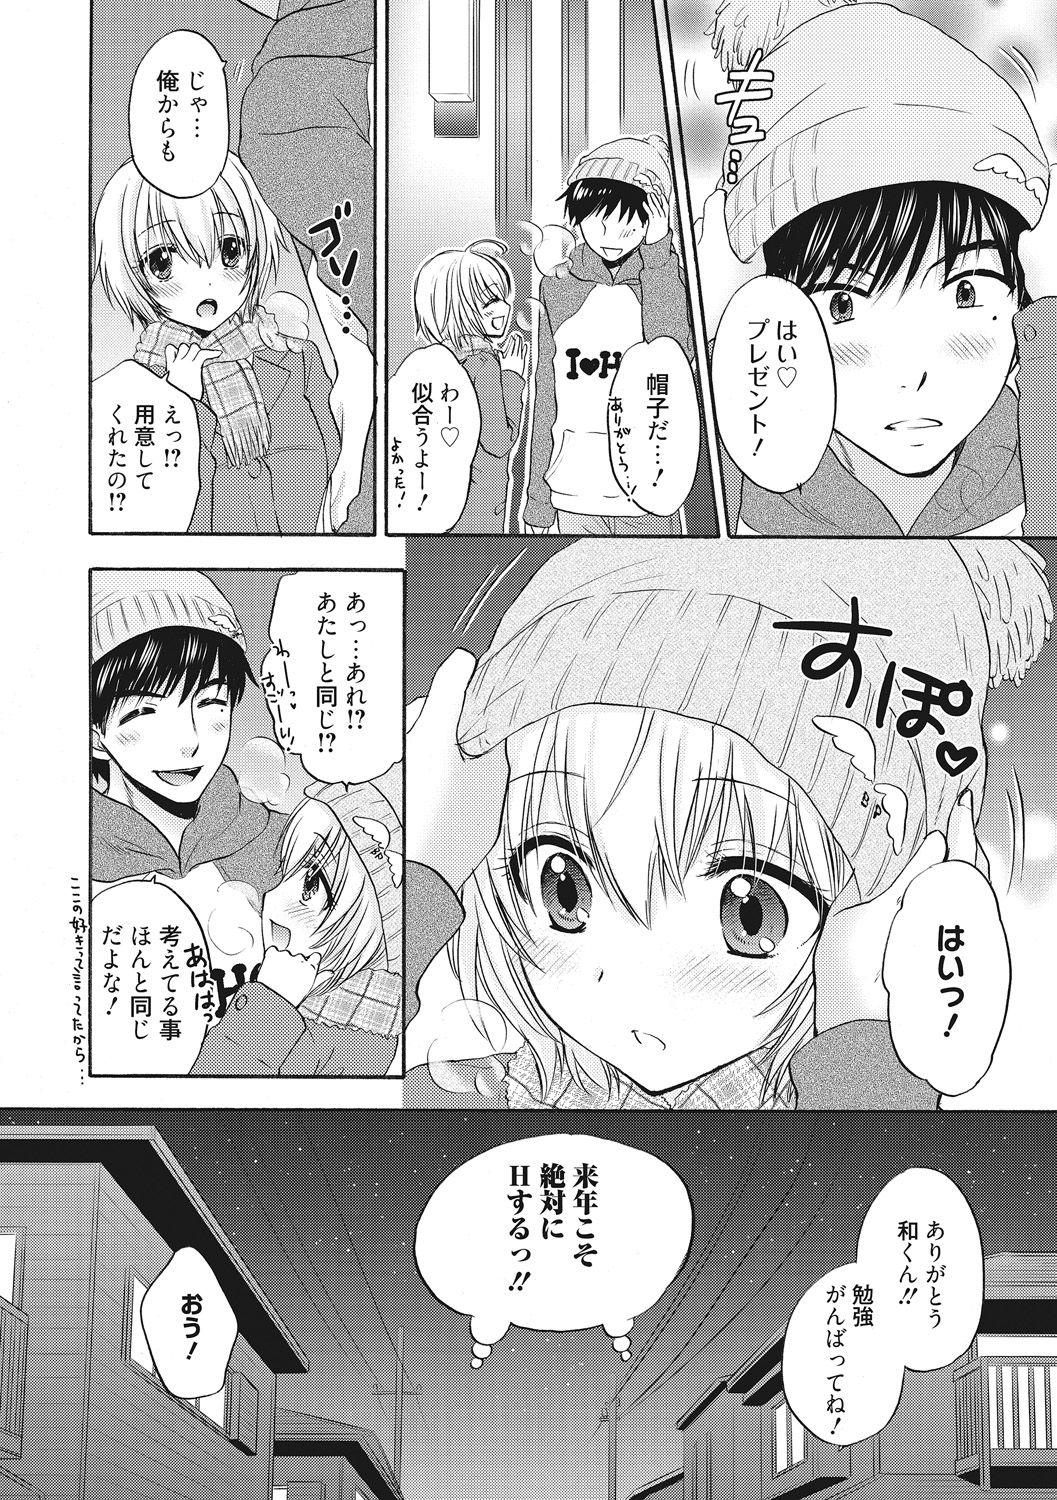 Guys Houkago Love Mode 11 Mms - Page 20